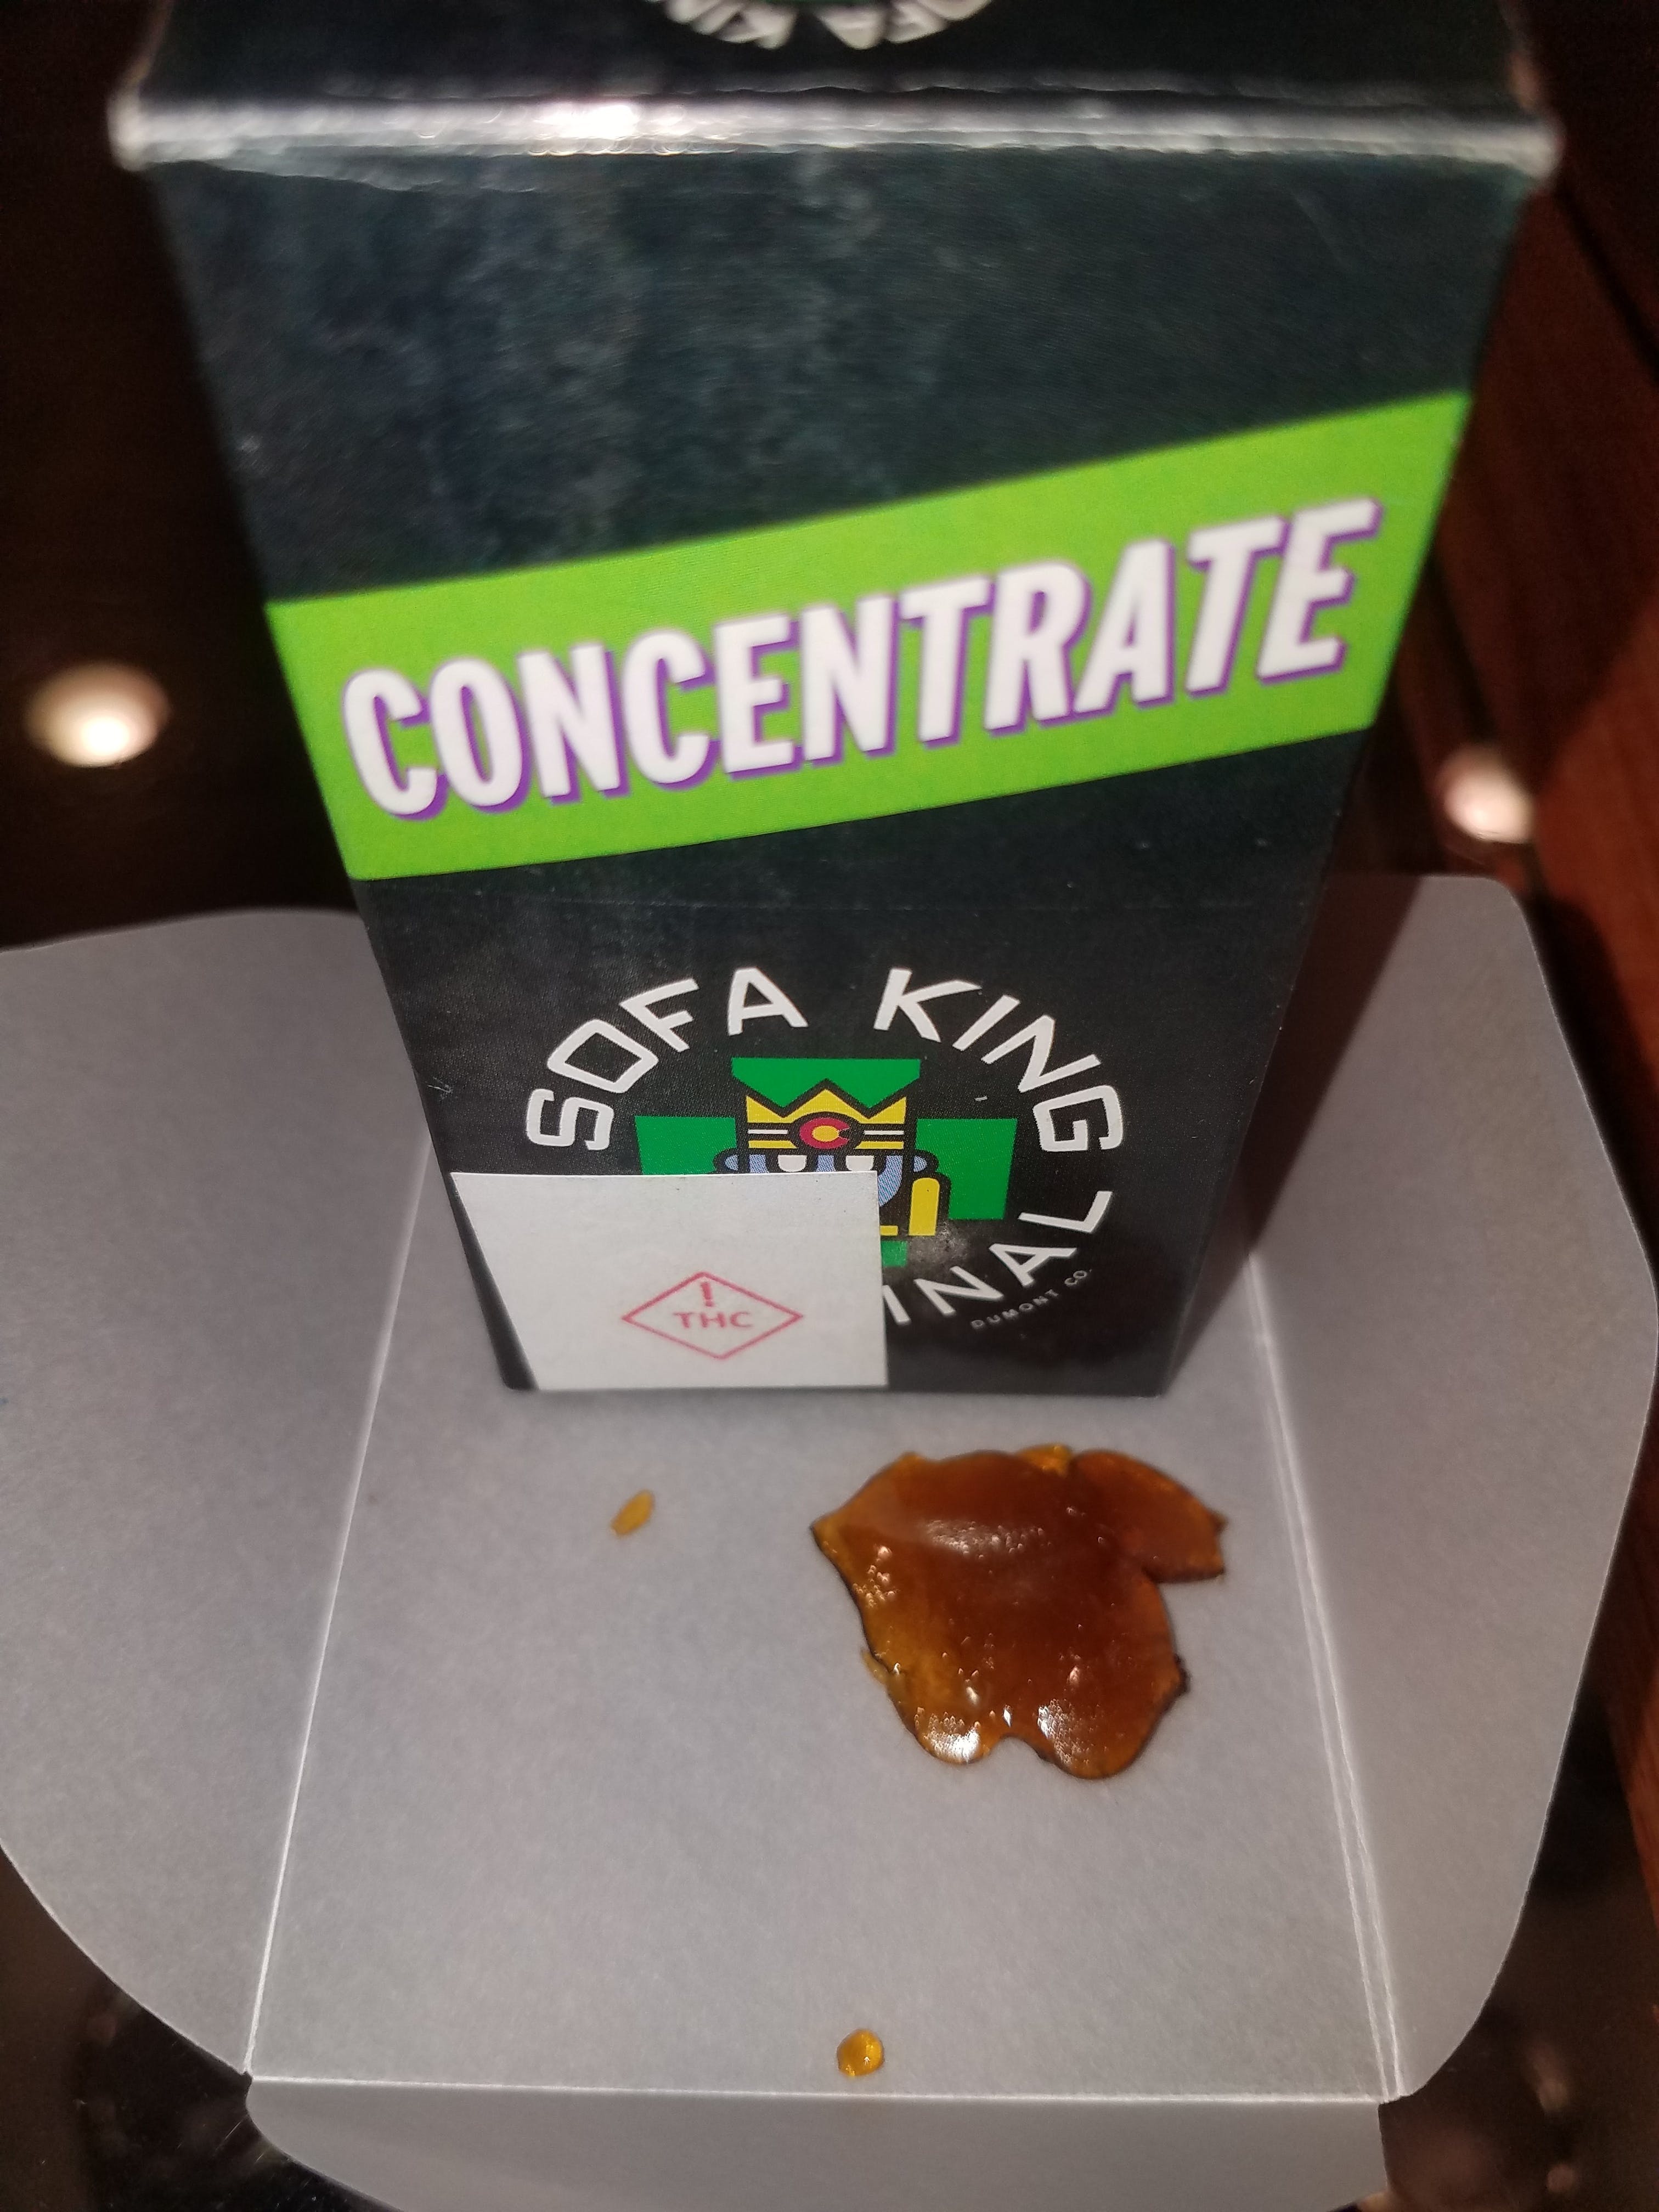 concentrate-new-price-21-21-shatter-sofa-king